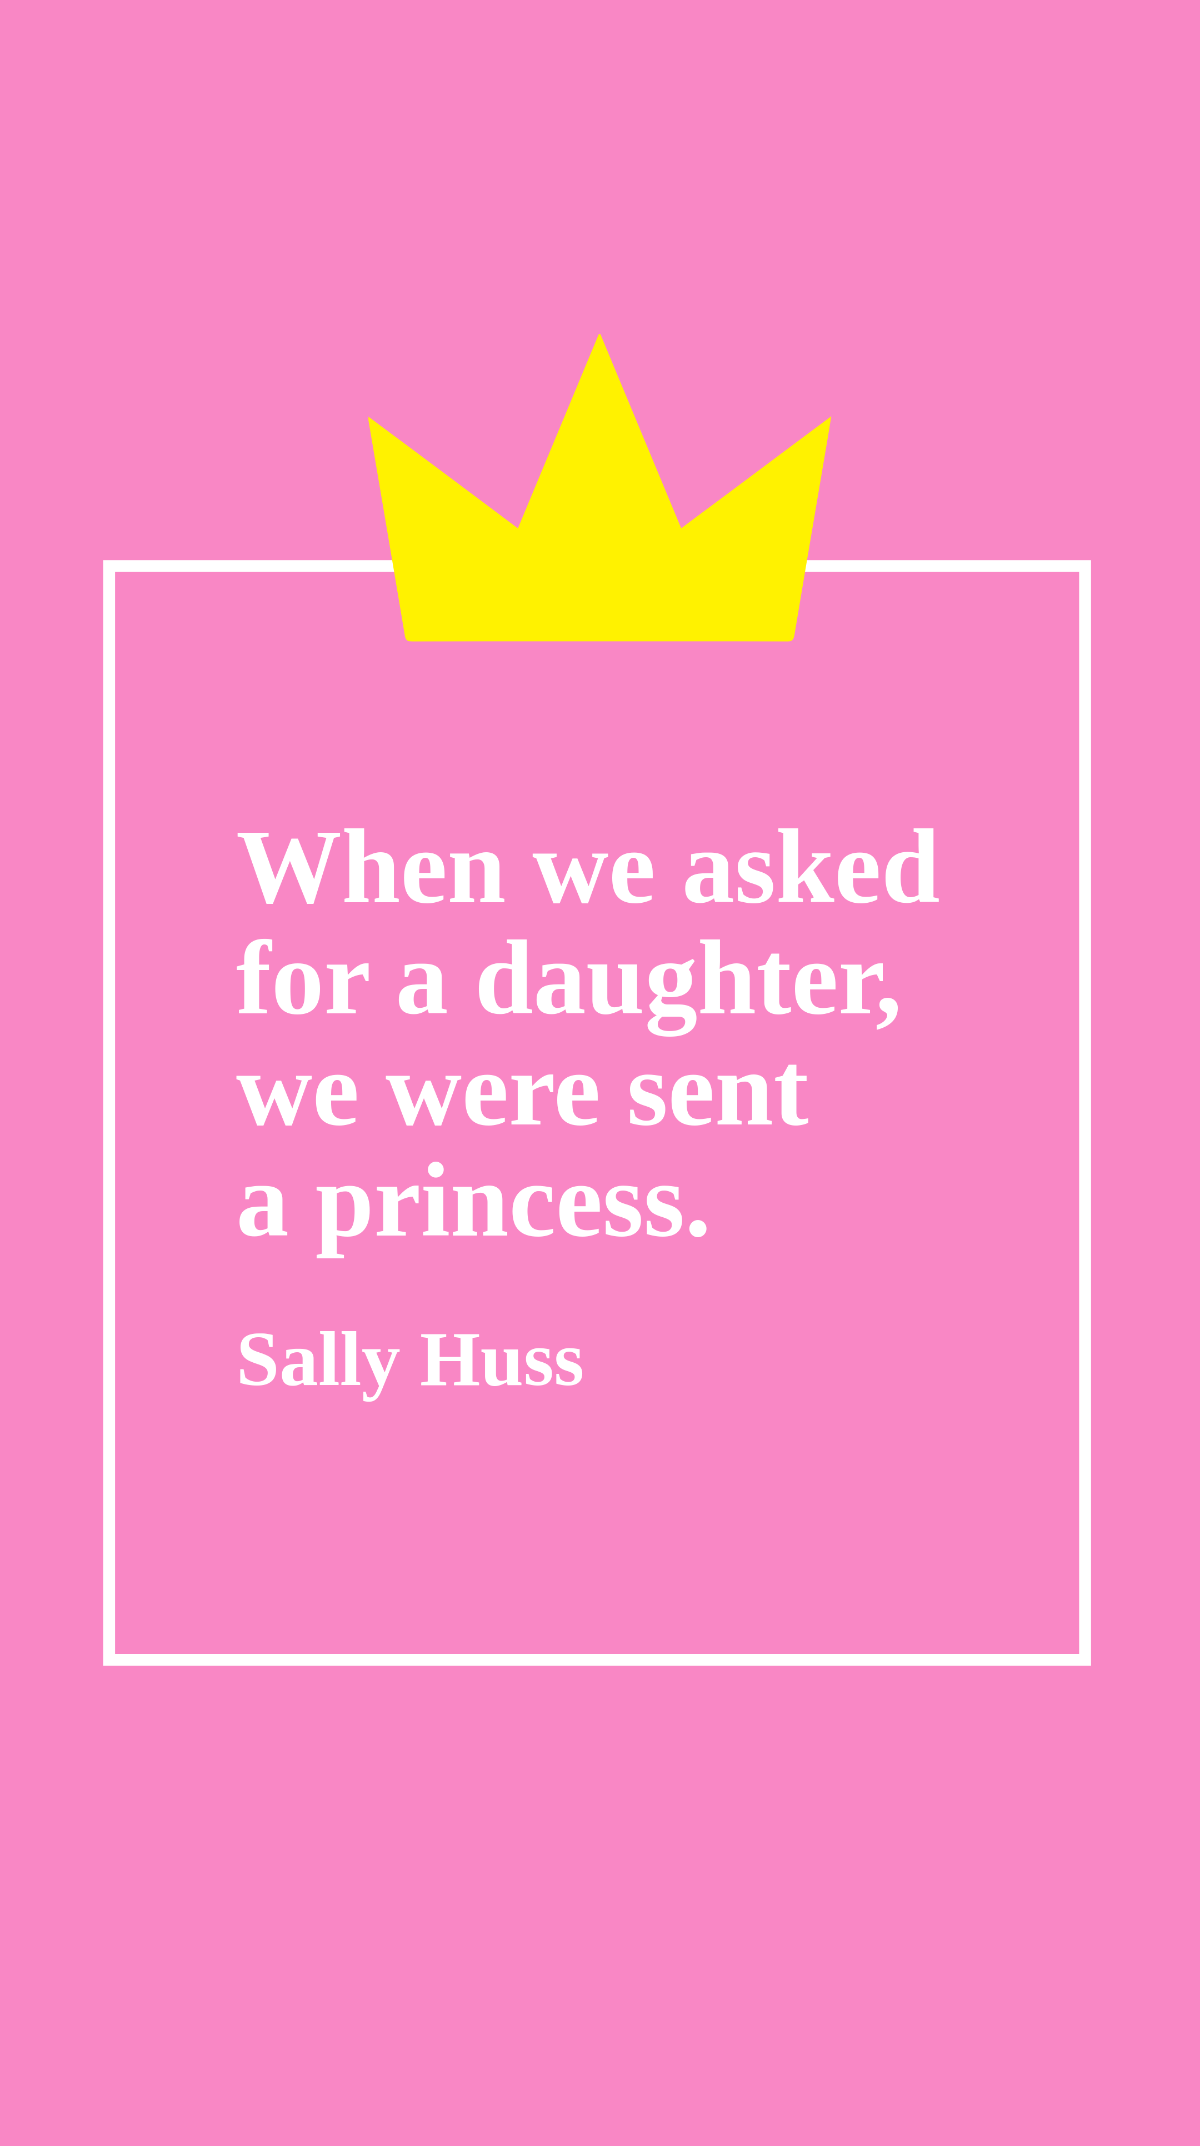 Sally Huss - When we asked for a daughter, we were sent a princess.